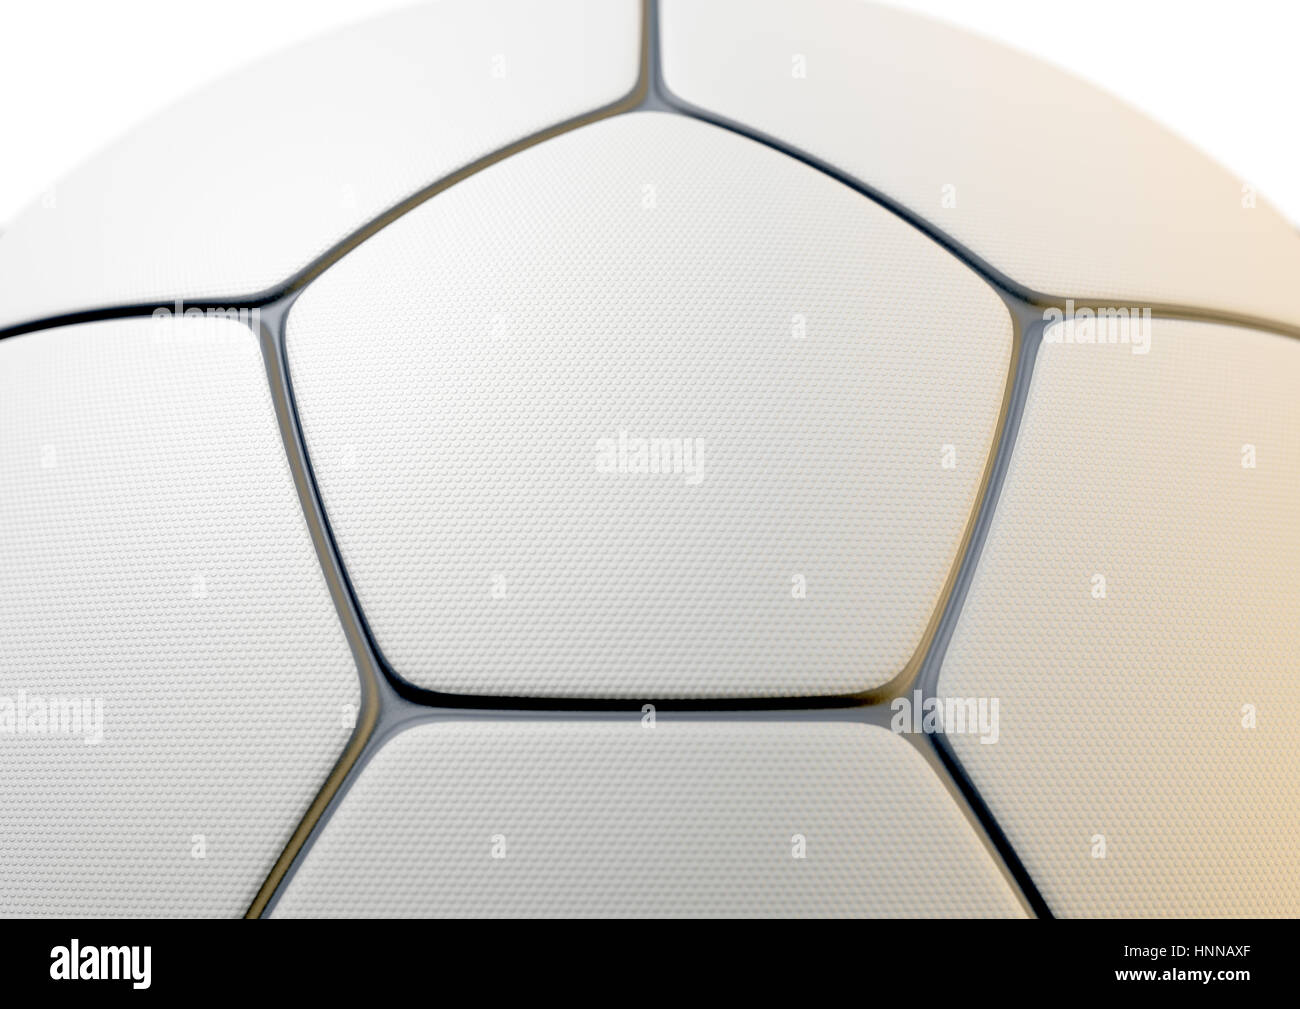 A closeup concept of a white synthetic soccer ball in a traditional shape with a dimple textured surface and dark grey inlays - 3D render Stock Photo